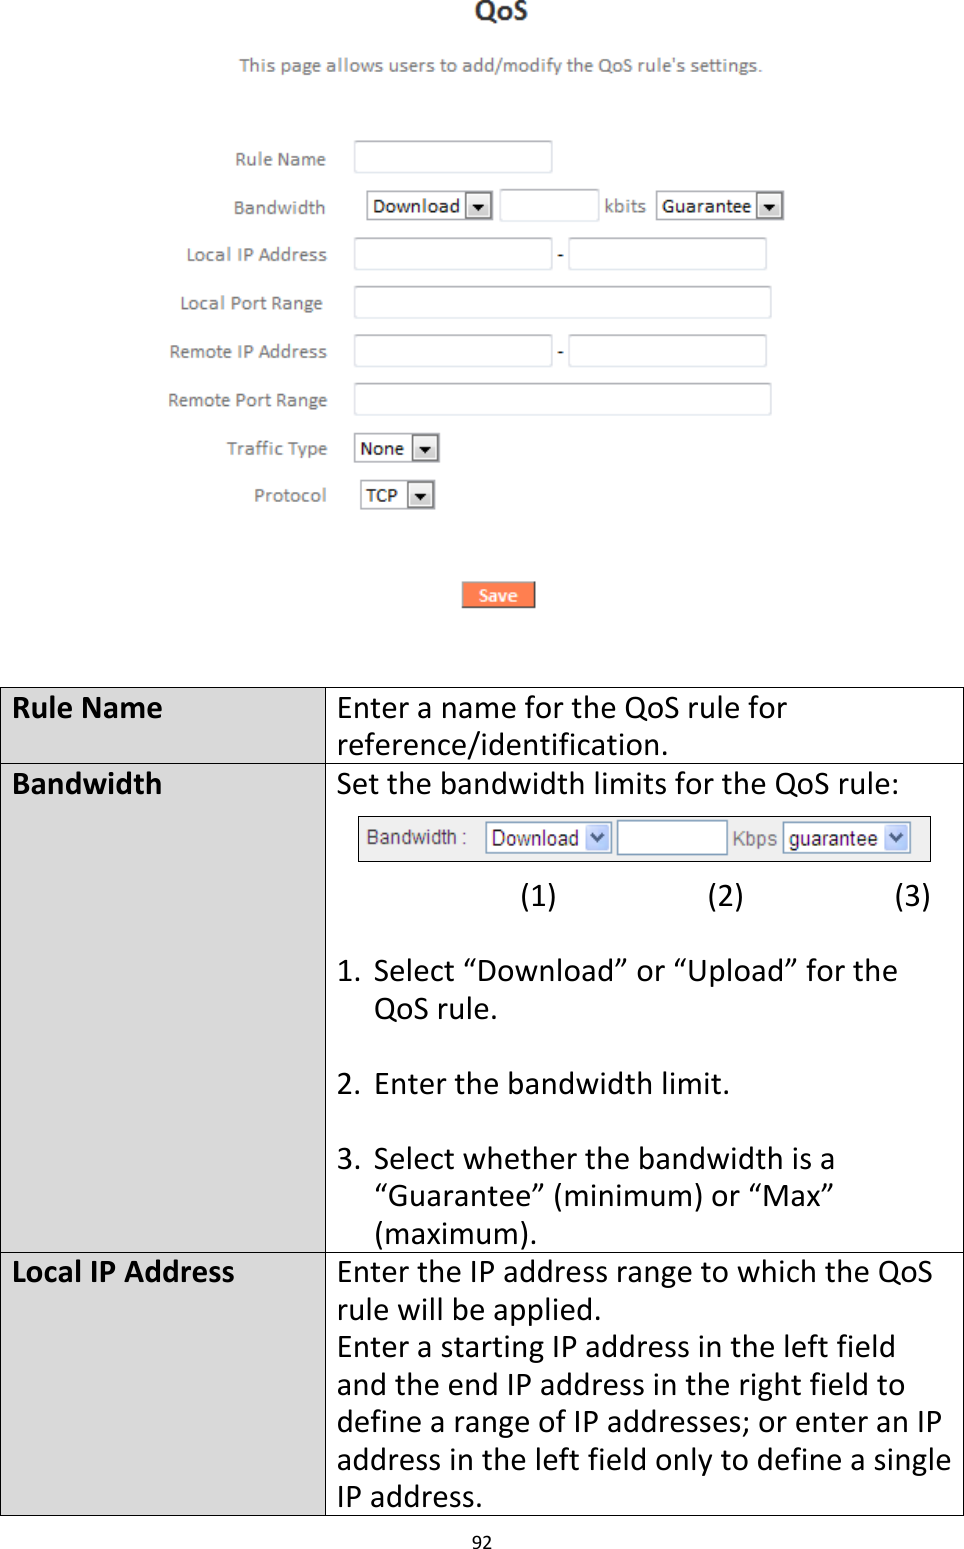 92    Rule Name Enter a name for the QoS rule for reference/identification. Bandwidth Set the bandwidth limits for the QoS rule:             (1)         (2)         (3)  1. Select “Download” or “Upload” for the QoS rule.  2. Enter the bandwidth limit.  3. Select whether the bandwidth is a “Guarantee” (minimum) or “Max” (maximum). Local IP Address Enter the IP address range to which the QoS rule will be applied. Enter a starting IP address in the left field and the end IP address in the right field to define a range of IP addresses; or enter an IP address in the left field only to define a single IP address. 